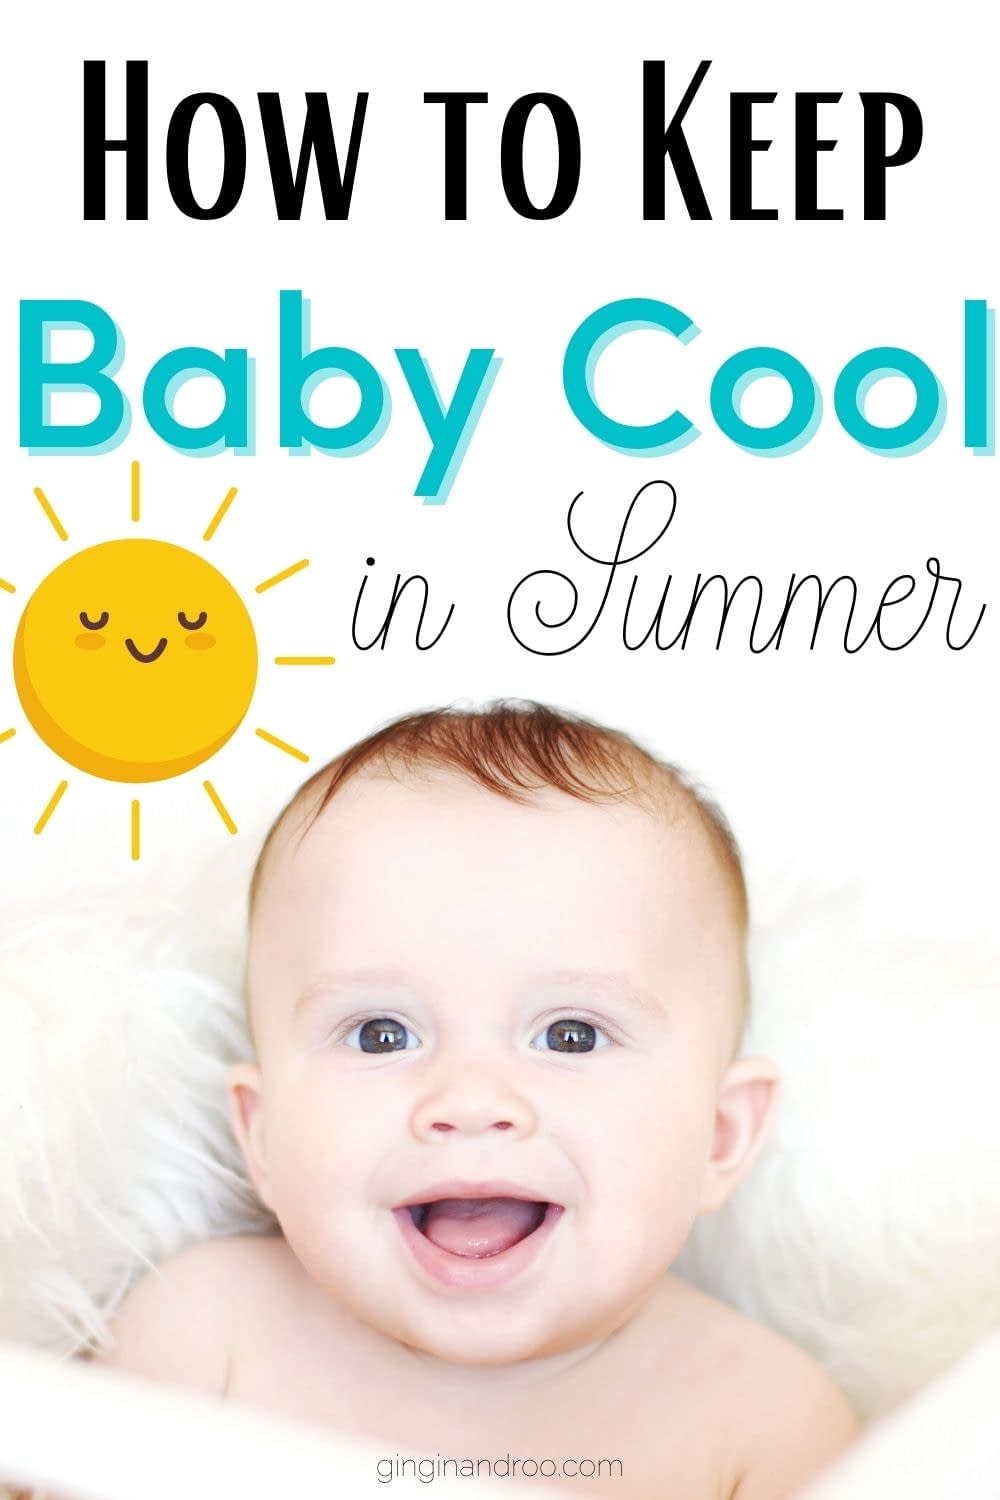 How to Keep Baby Cool in Summer - image of a baby with a cartoon sunshine